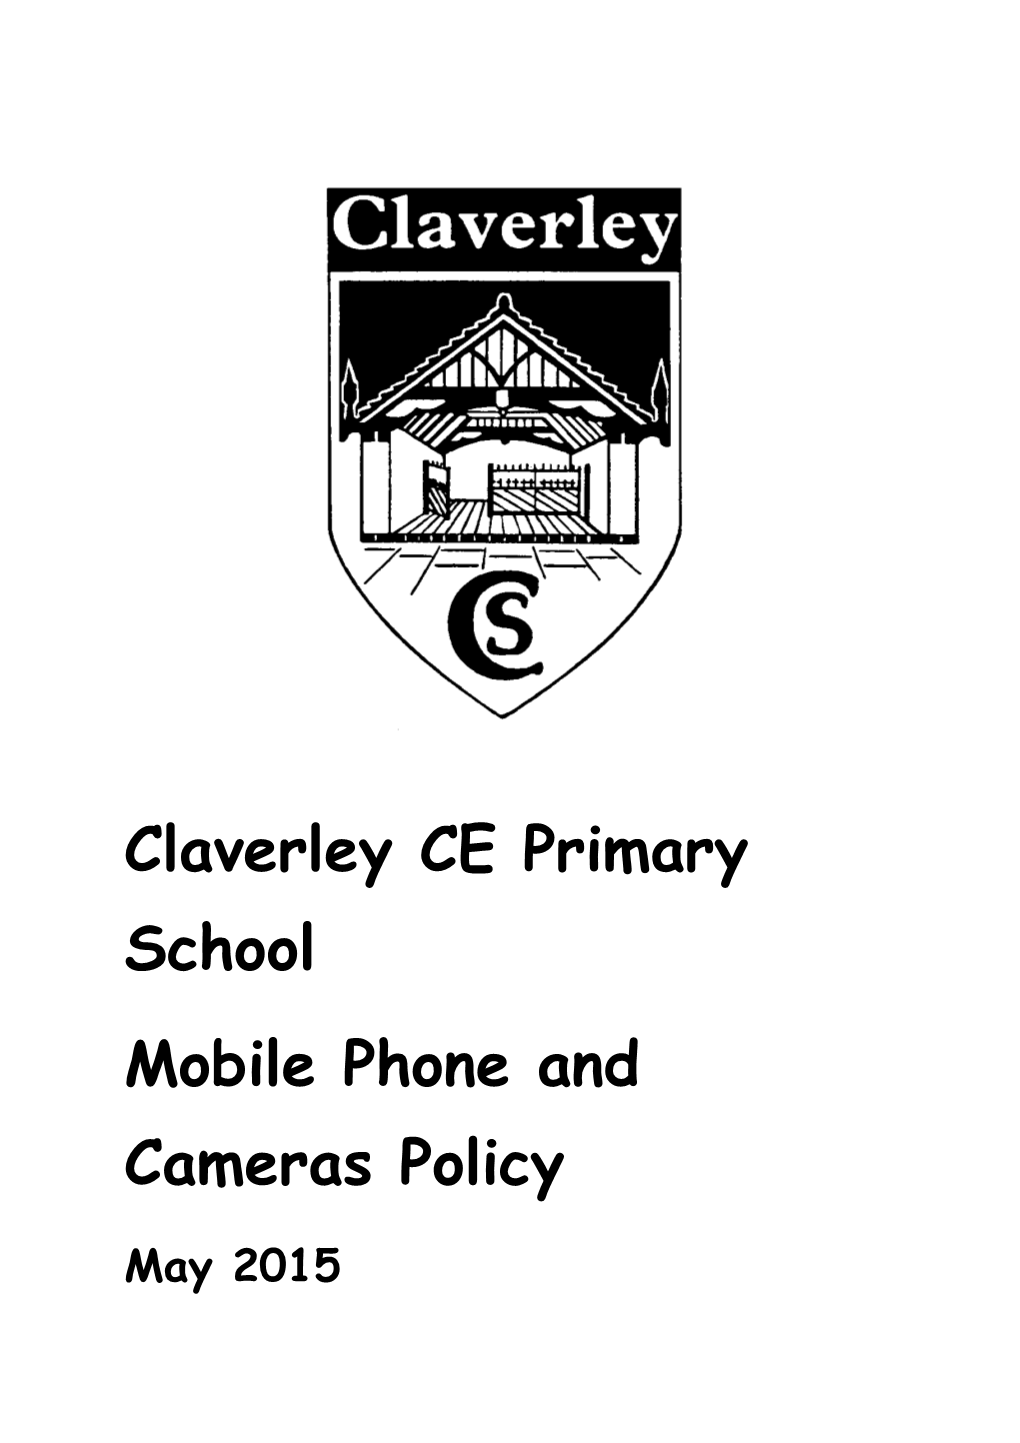 Mobile Phone and Cameras Policy